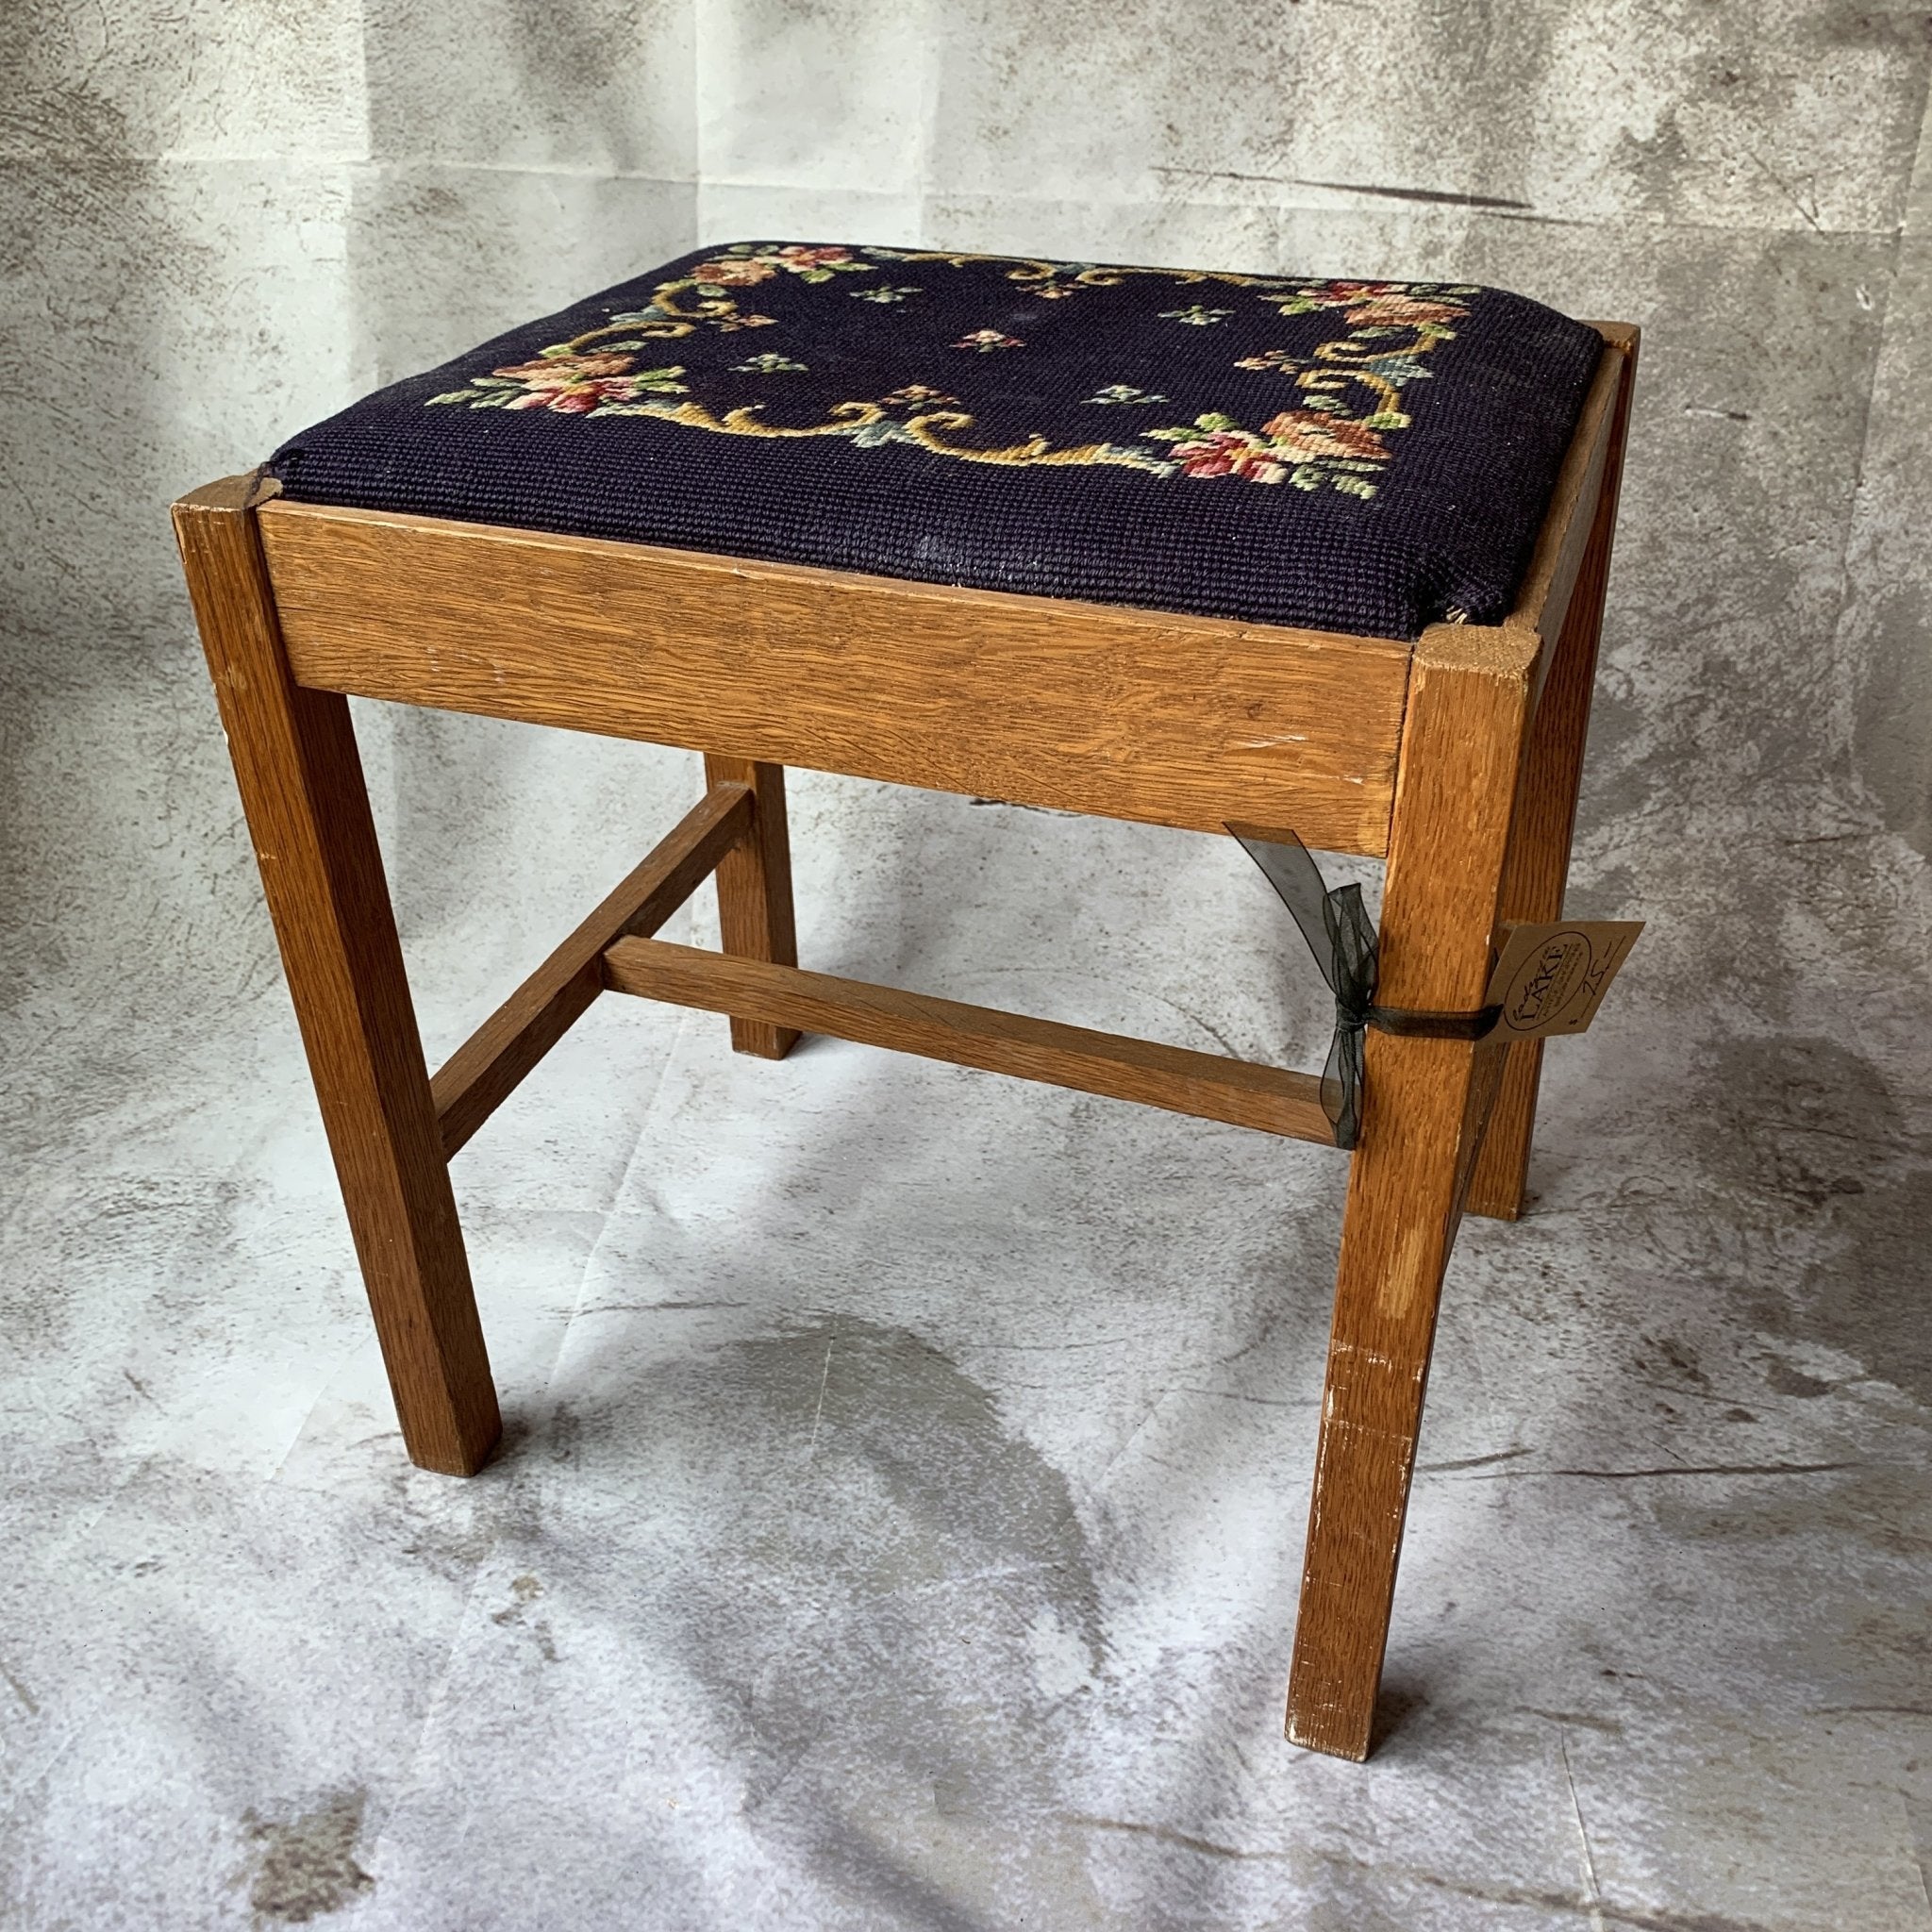 Embroidered Stool